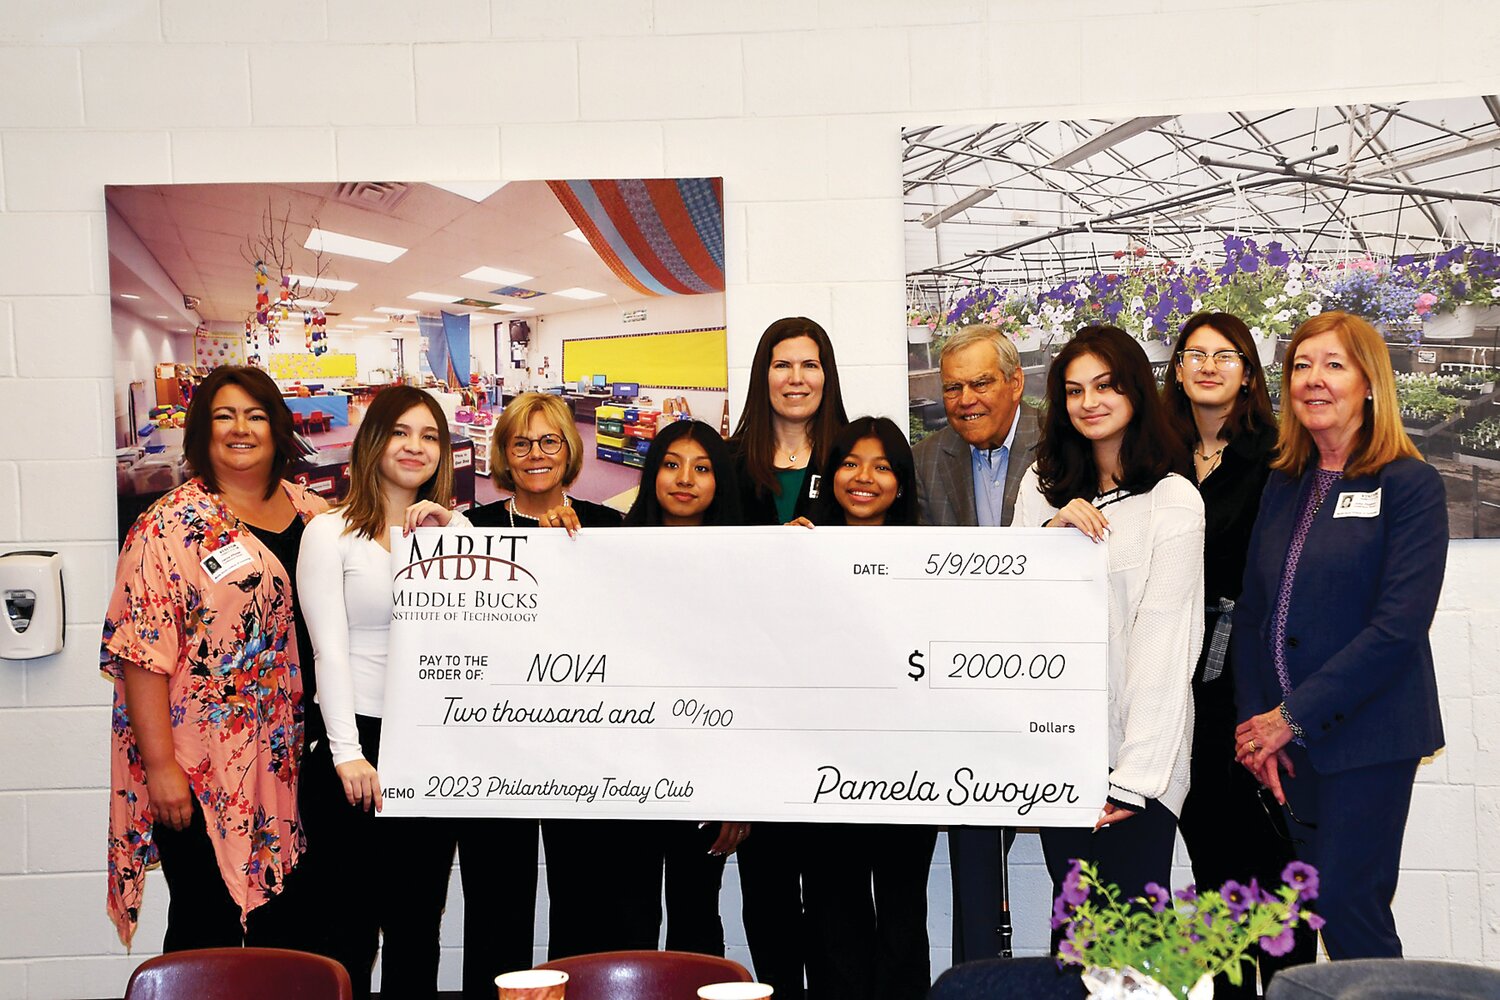 Members of the Philanthropy Today Club at Middle Bucks Institute of Technology joined representatives from The Norman Raab Foundation to present a check for $2,000 to NOVA. From left are: Jamie Pfister, training coordinator, NOVA; Carolina Balcarcel, Mariellen Brickley-Raab, Angie Patino, Sara Raab McInerny, Julissa Perez Ortiz, Stephen Raab, Emma Danilowicz, Katrina Puls; and Julie Dugery, coordinator of volunteers and community outreach, NOVA.